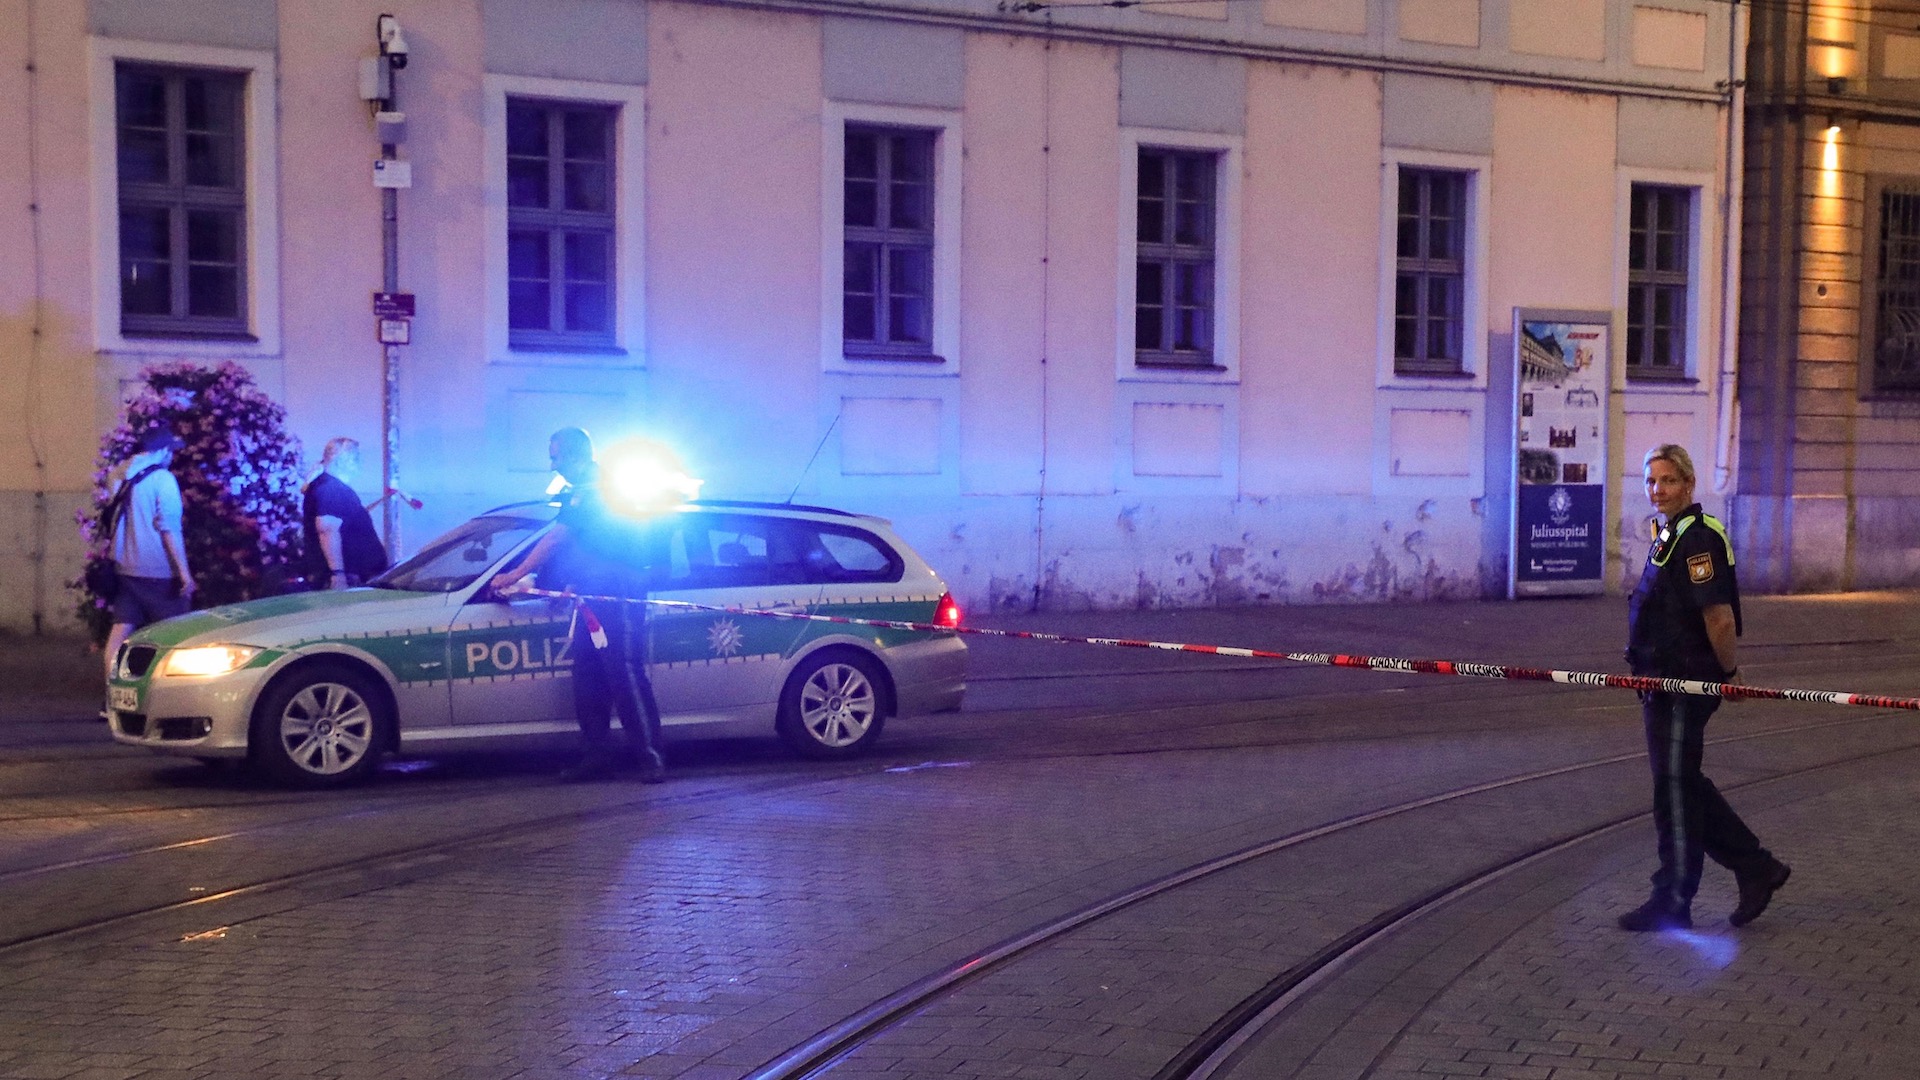 Police Confirm Three People Killed, 5 Injured in German Knife Attack